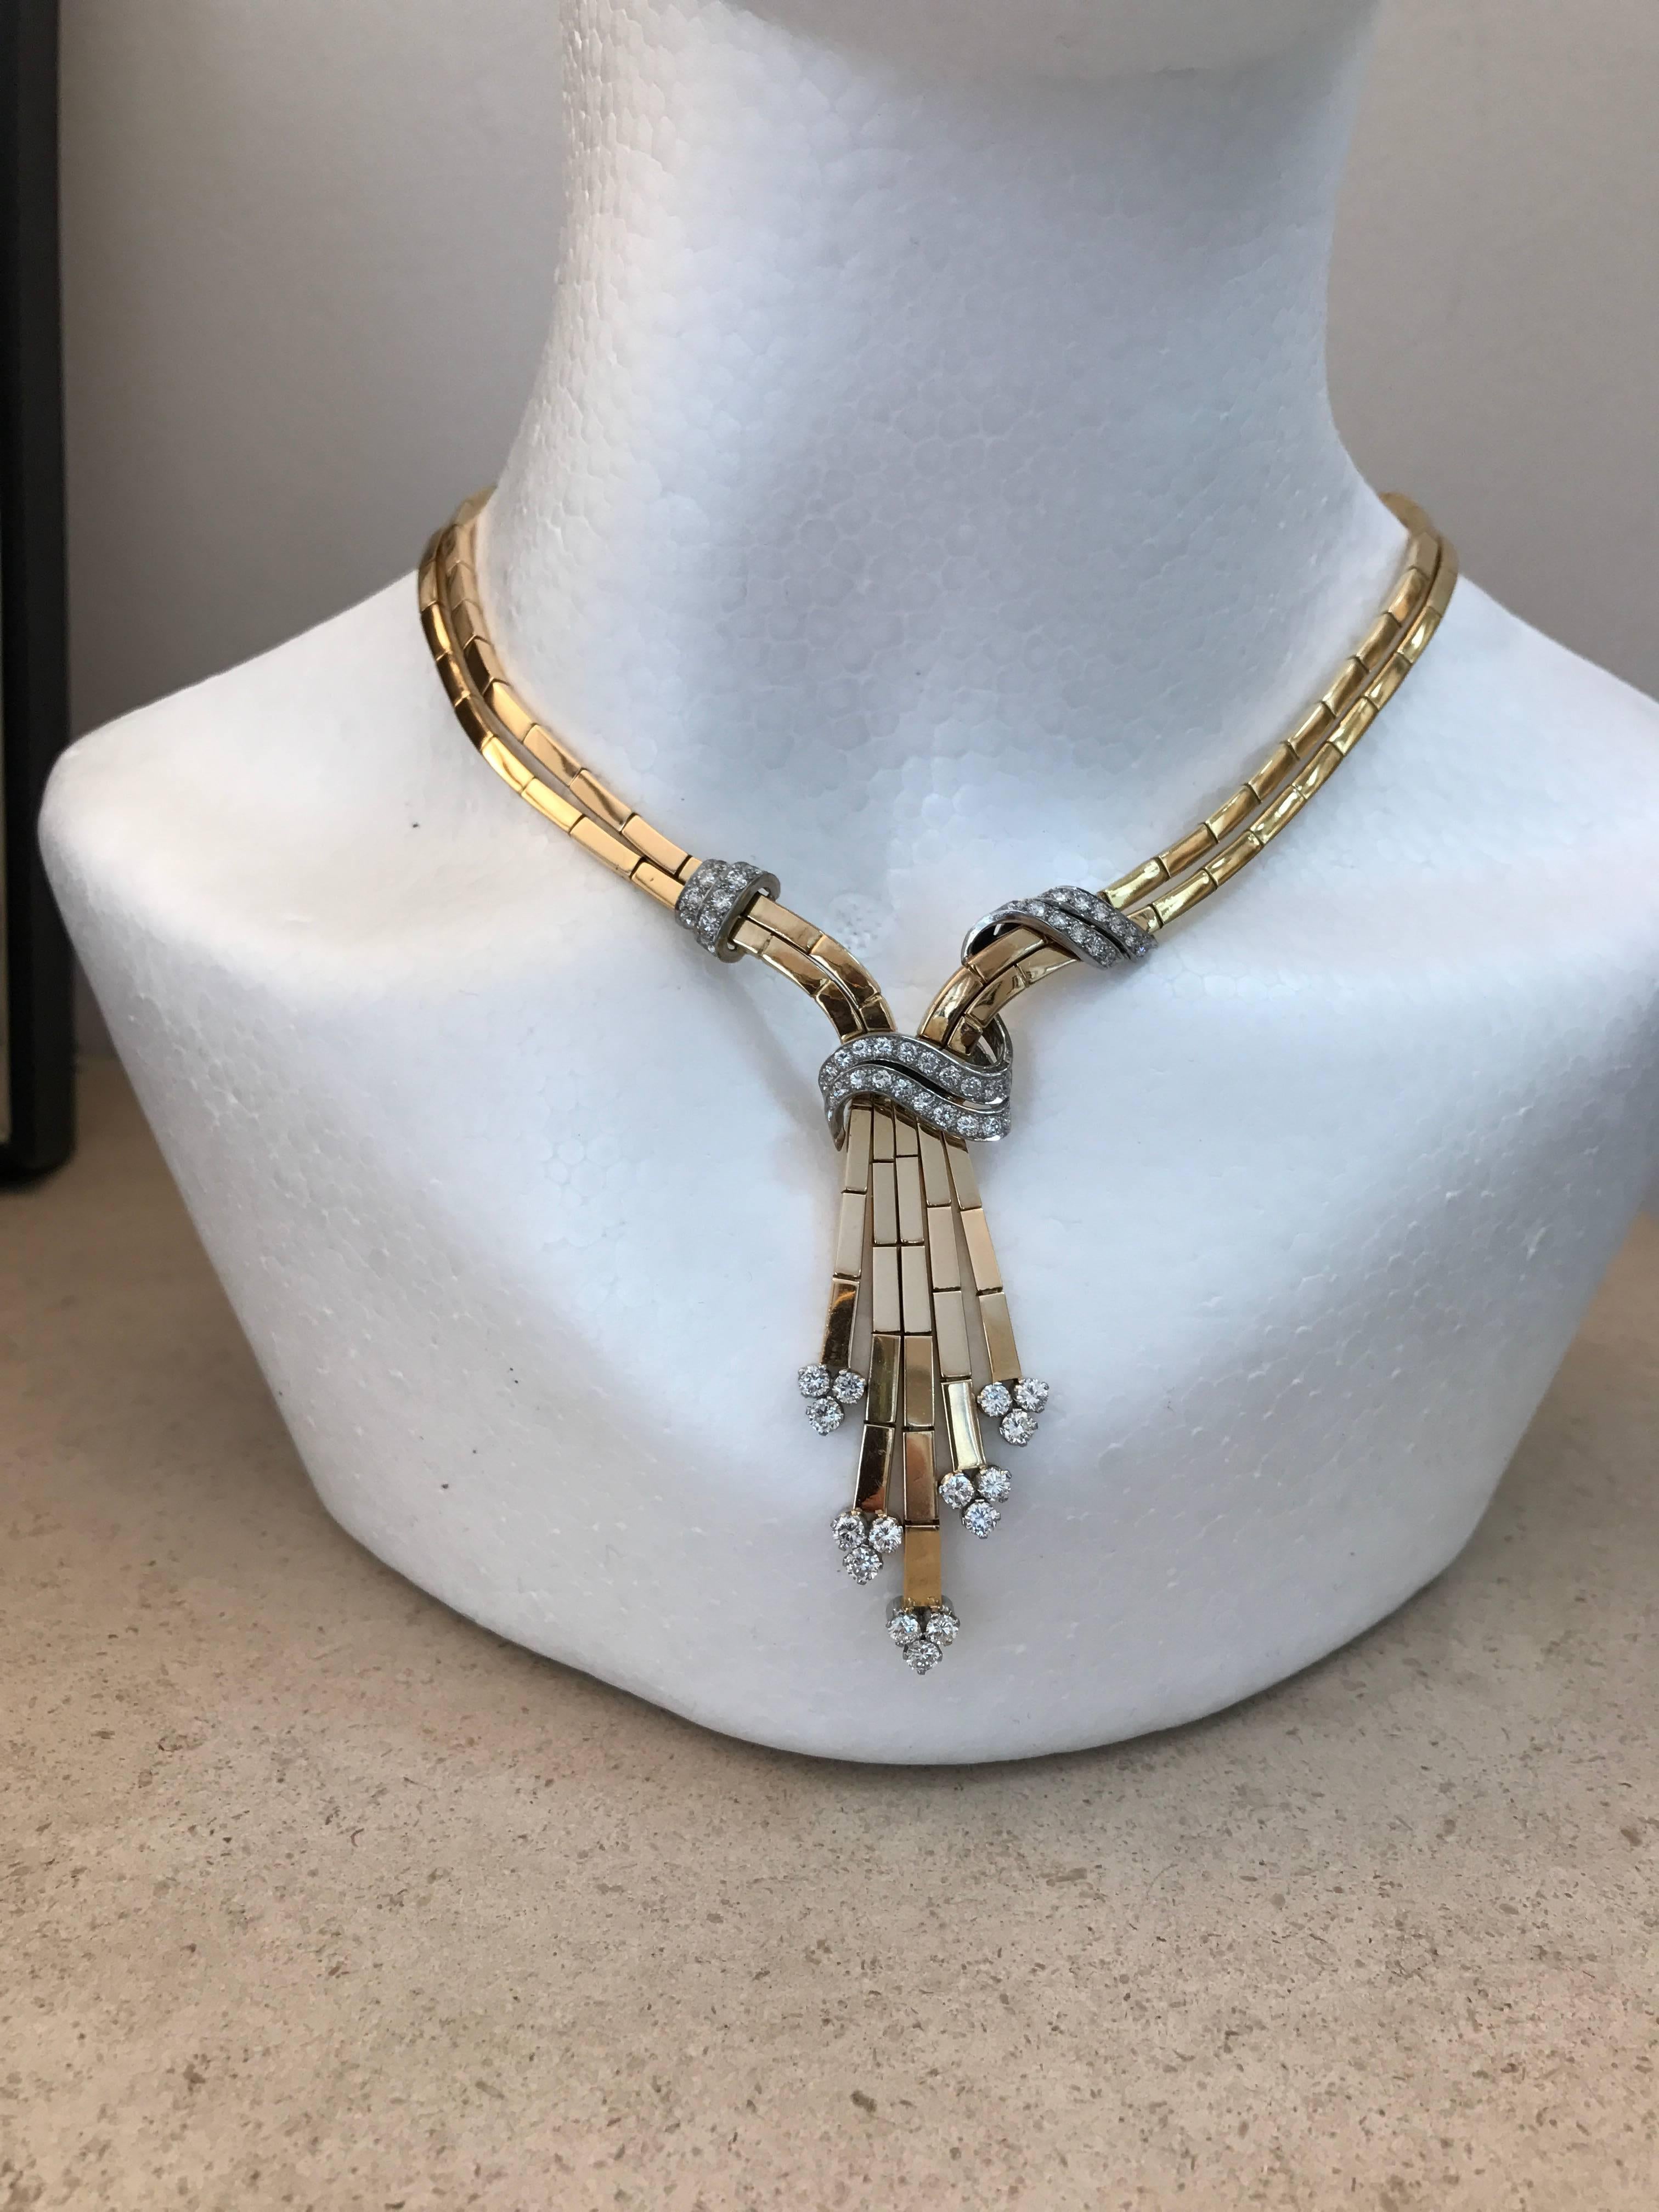 An extremely stylish and elegant 18ct yellow gold box link tassel necklace with brilliant cut diamond ribbon and trefoil detail made circa 1950

Length from top of diamond two row band to bottom of longest tassel 6.4cms
Width of two row necklace